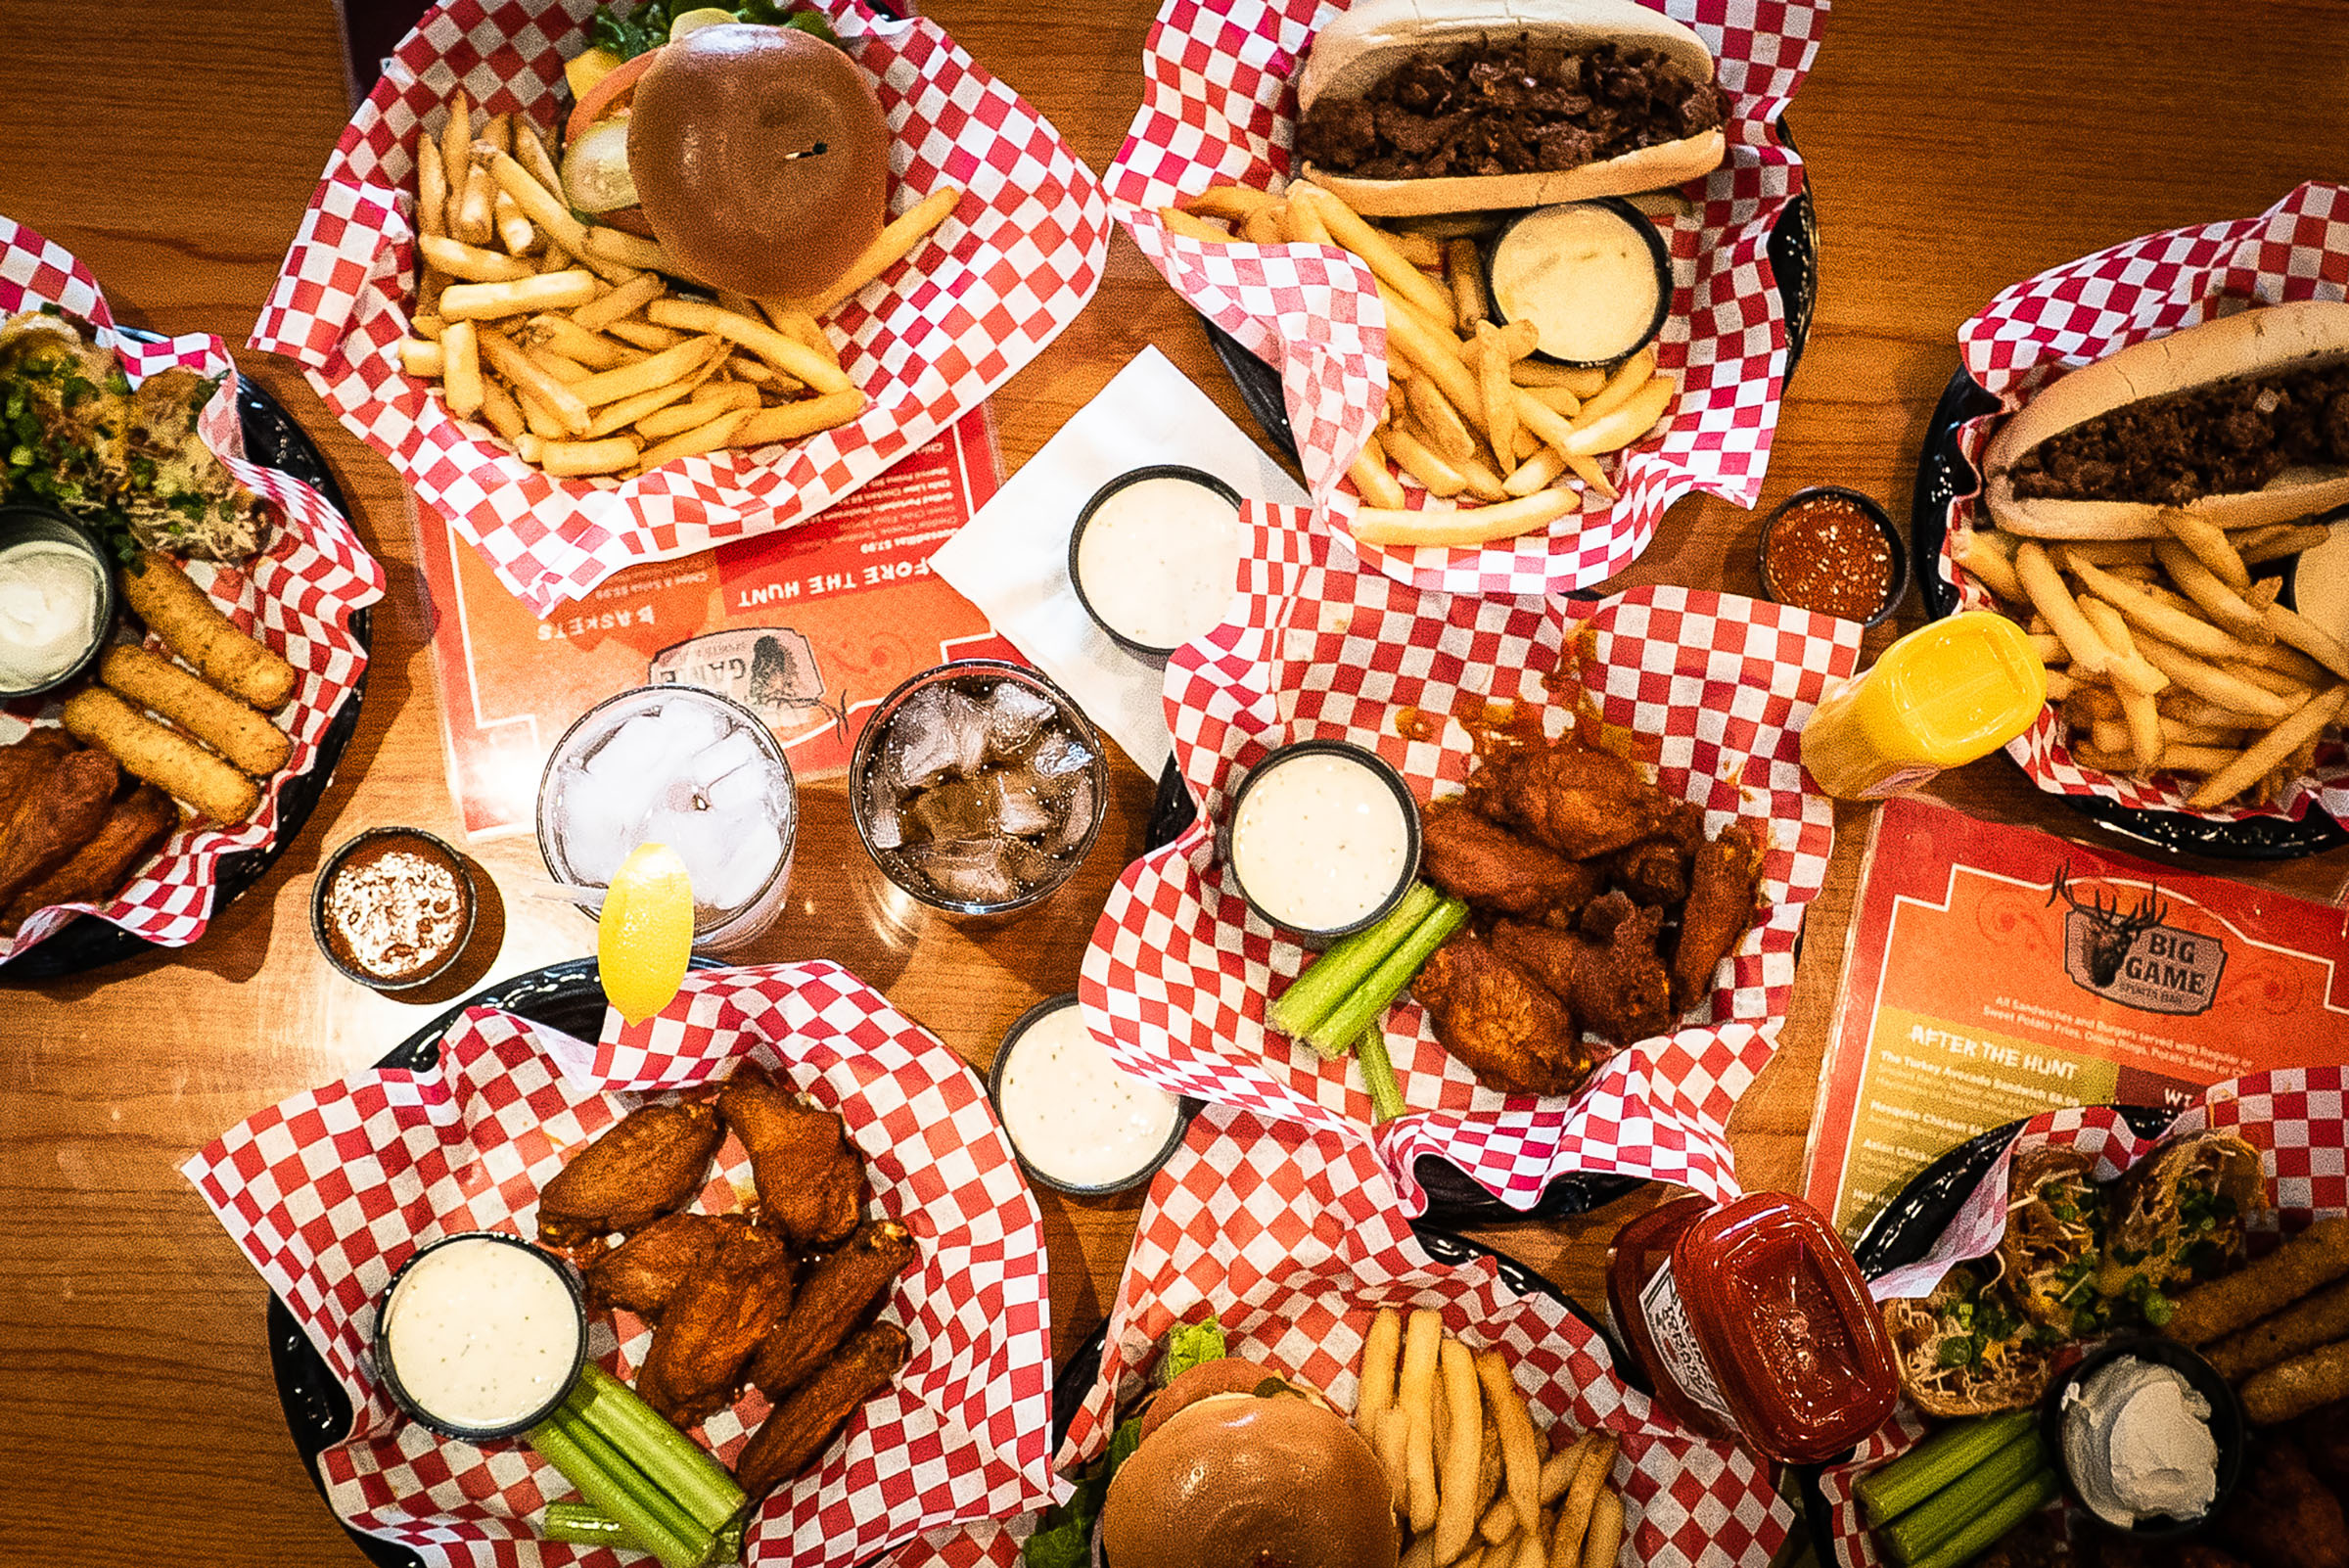 Baskets of chicken wings, burgers, and bar food.